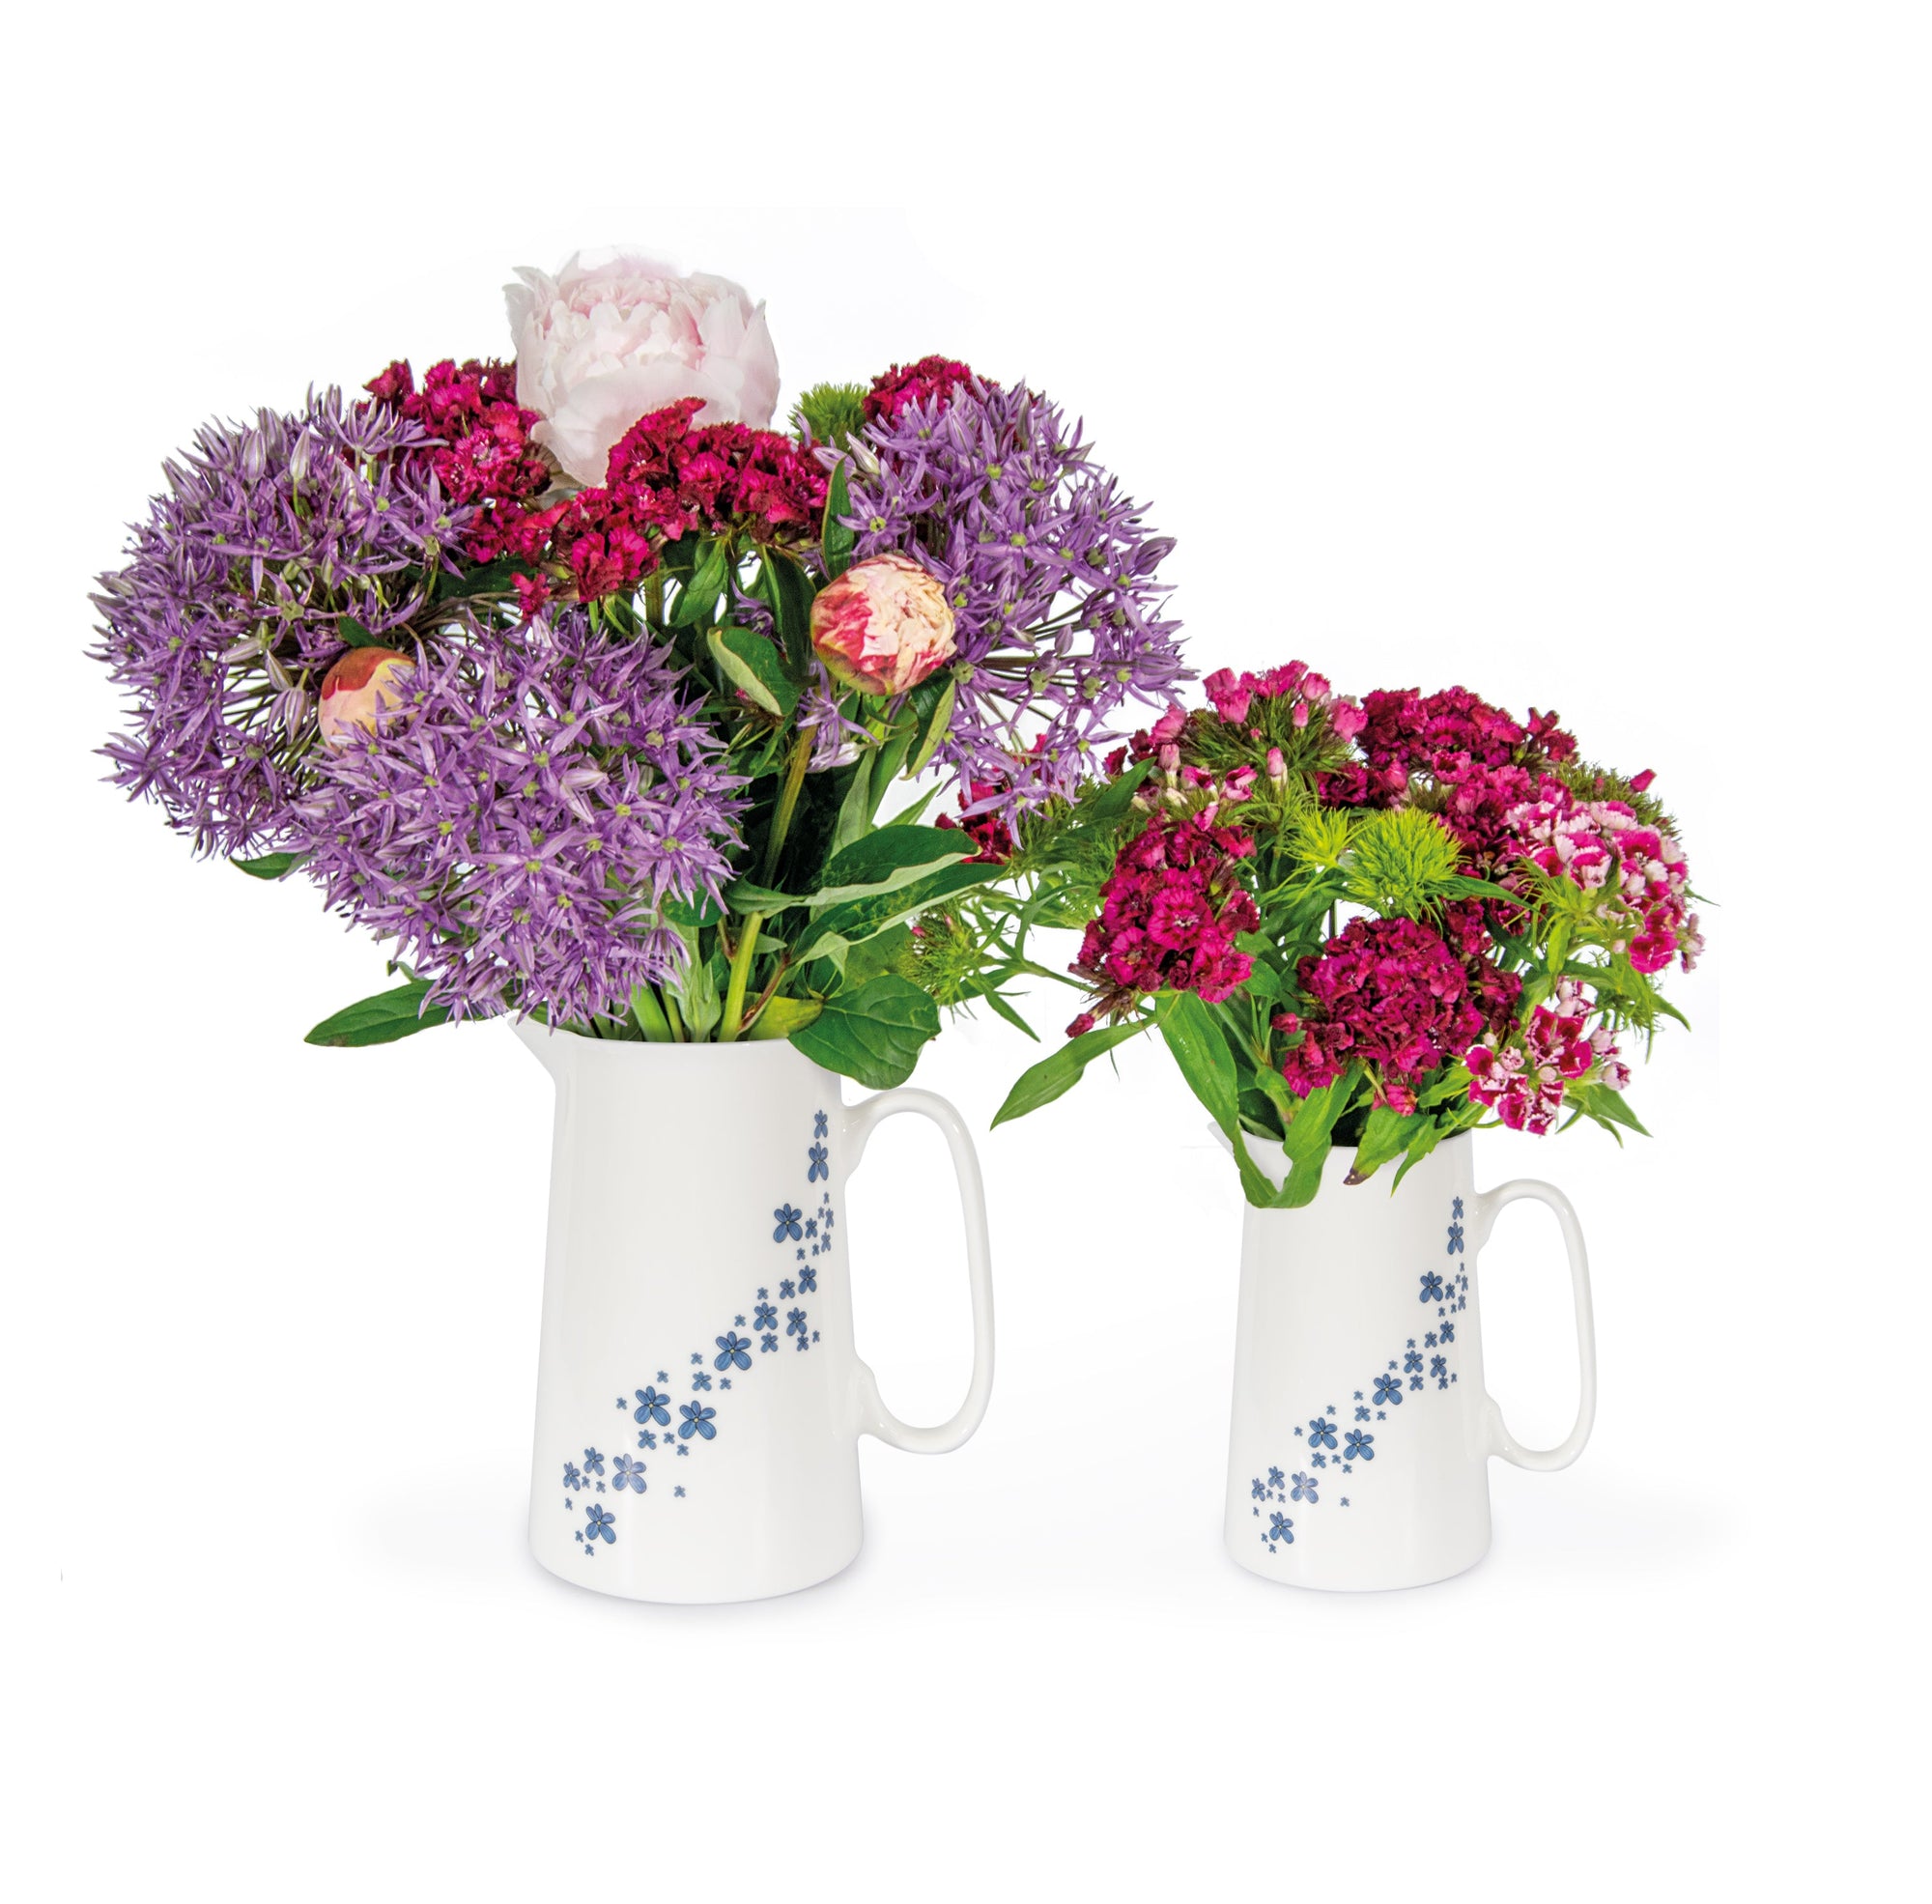 Two forget-me-not white jars holding bunches of purple flowers